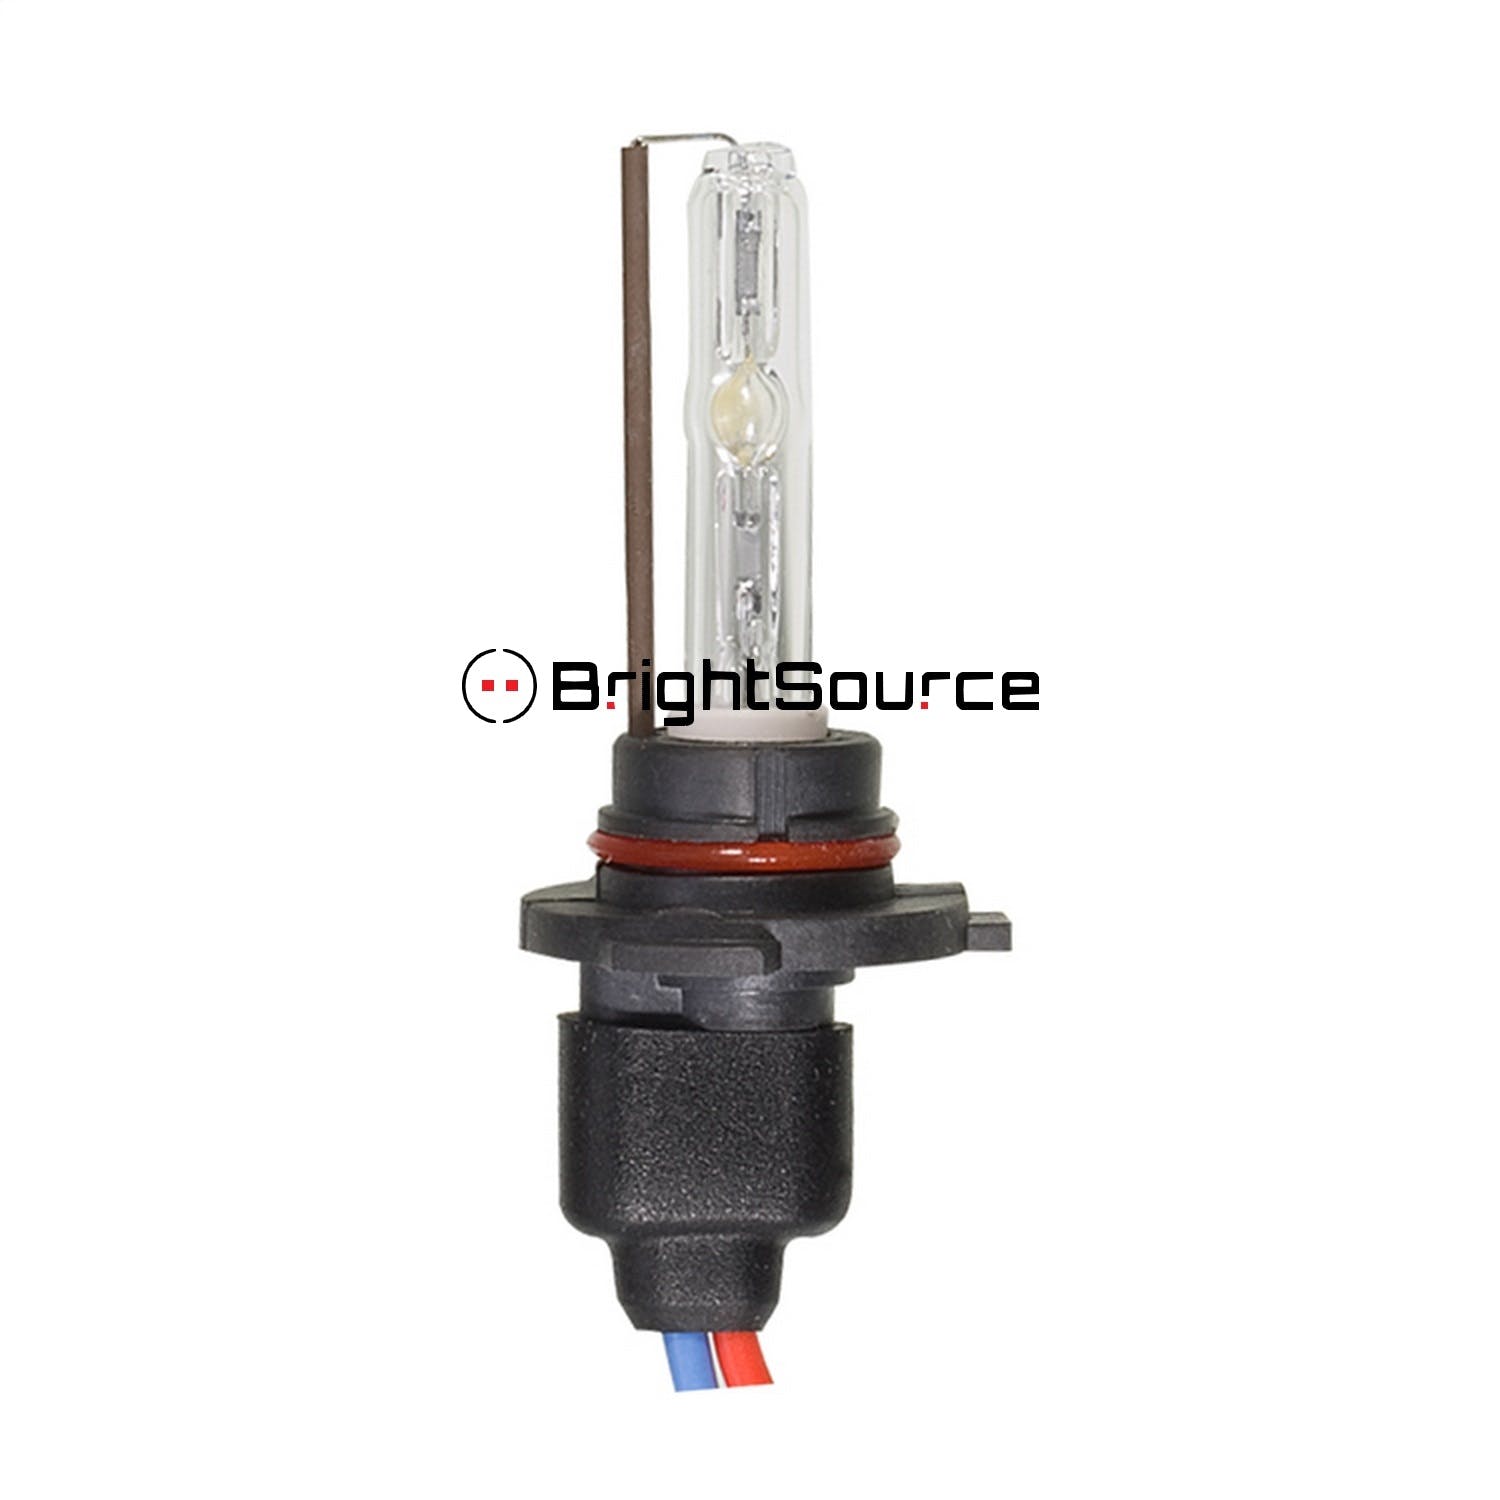 BrightSource 39005 HID Kit